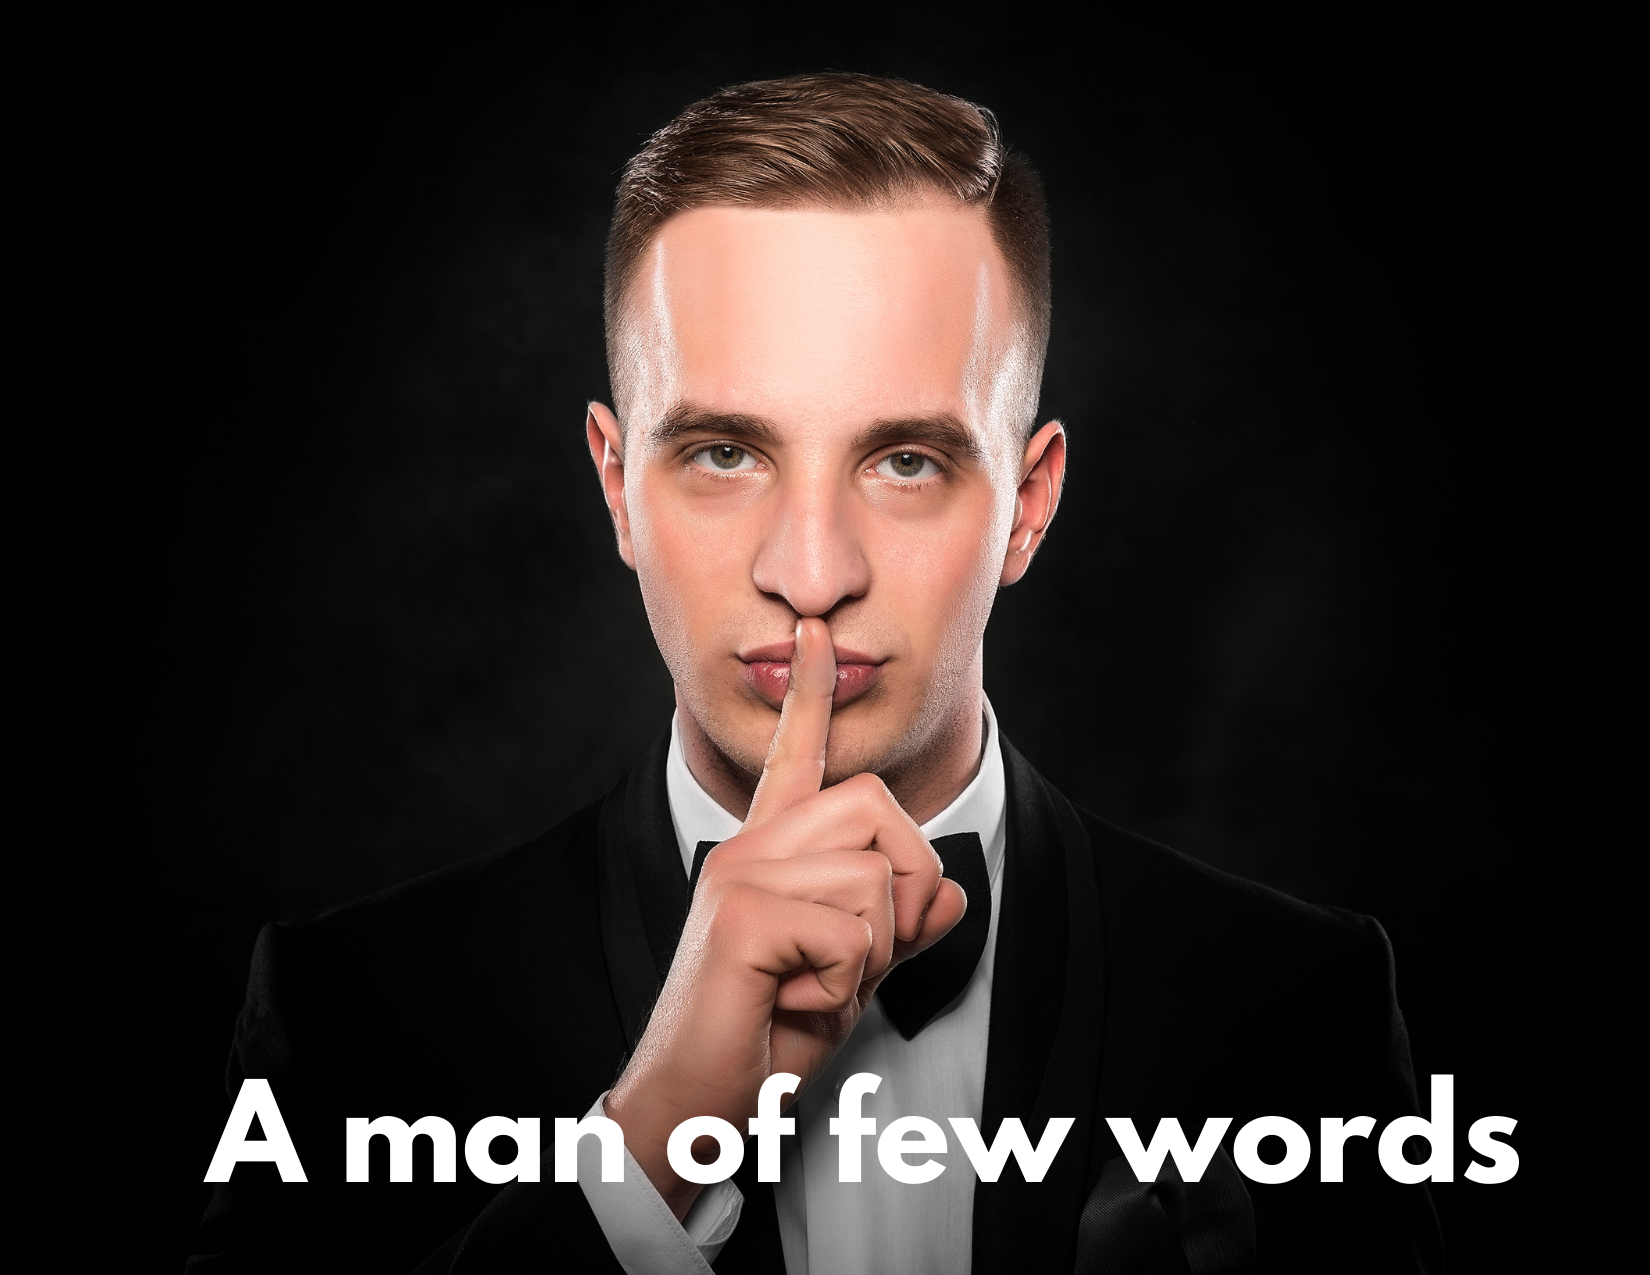 A picture of a man with his lips up to his lips with the words "A man of few words"